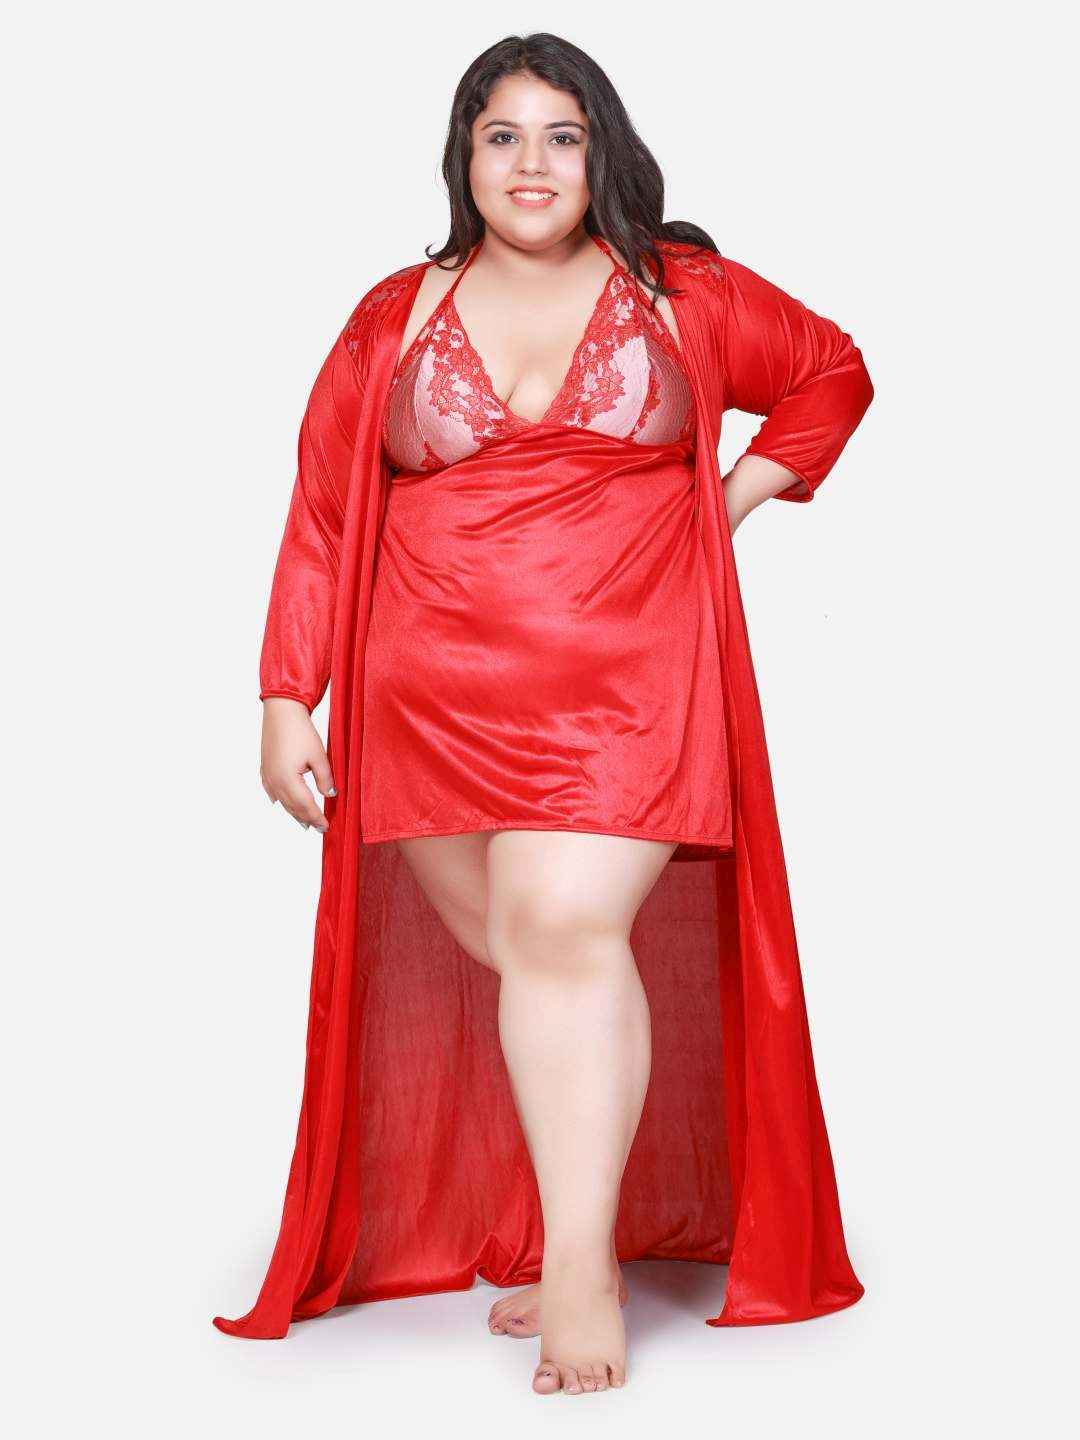 Plus Size Hot Two Piece Maroon Babydoll Night Dress for Women 301Mg